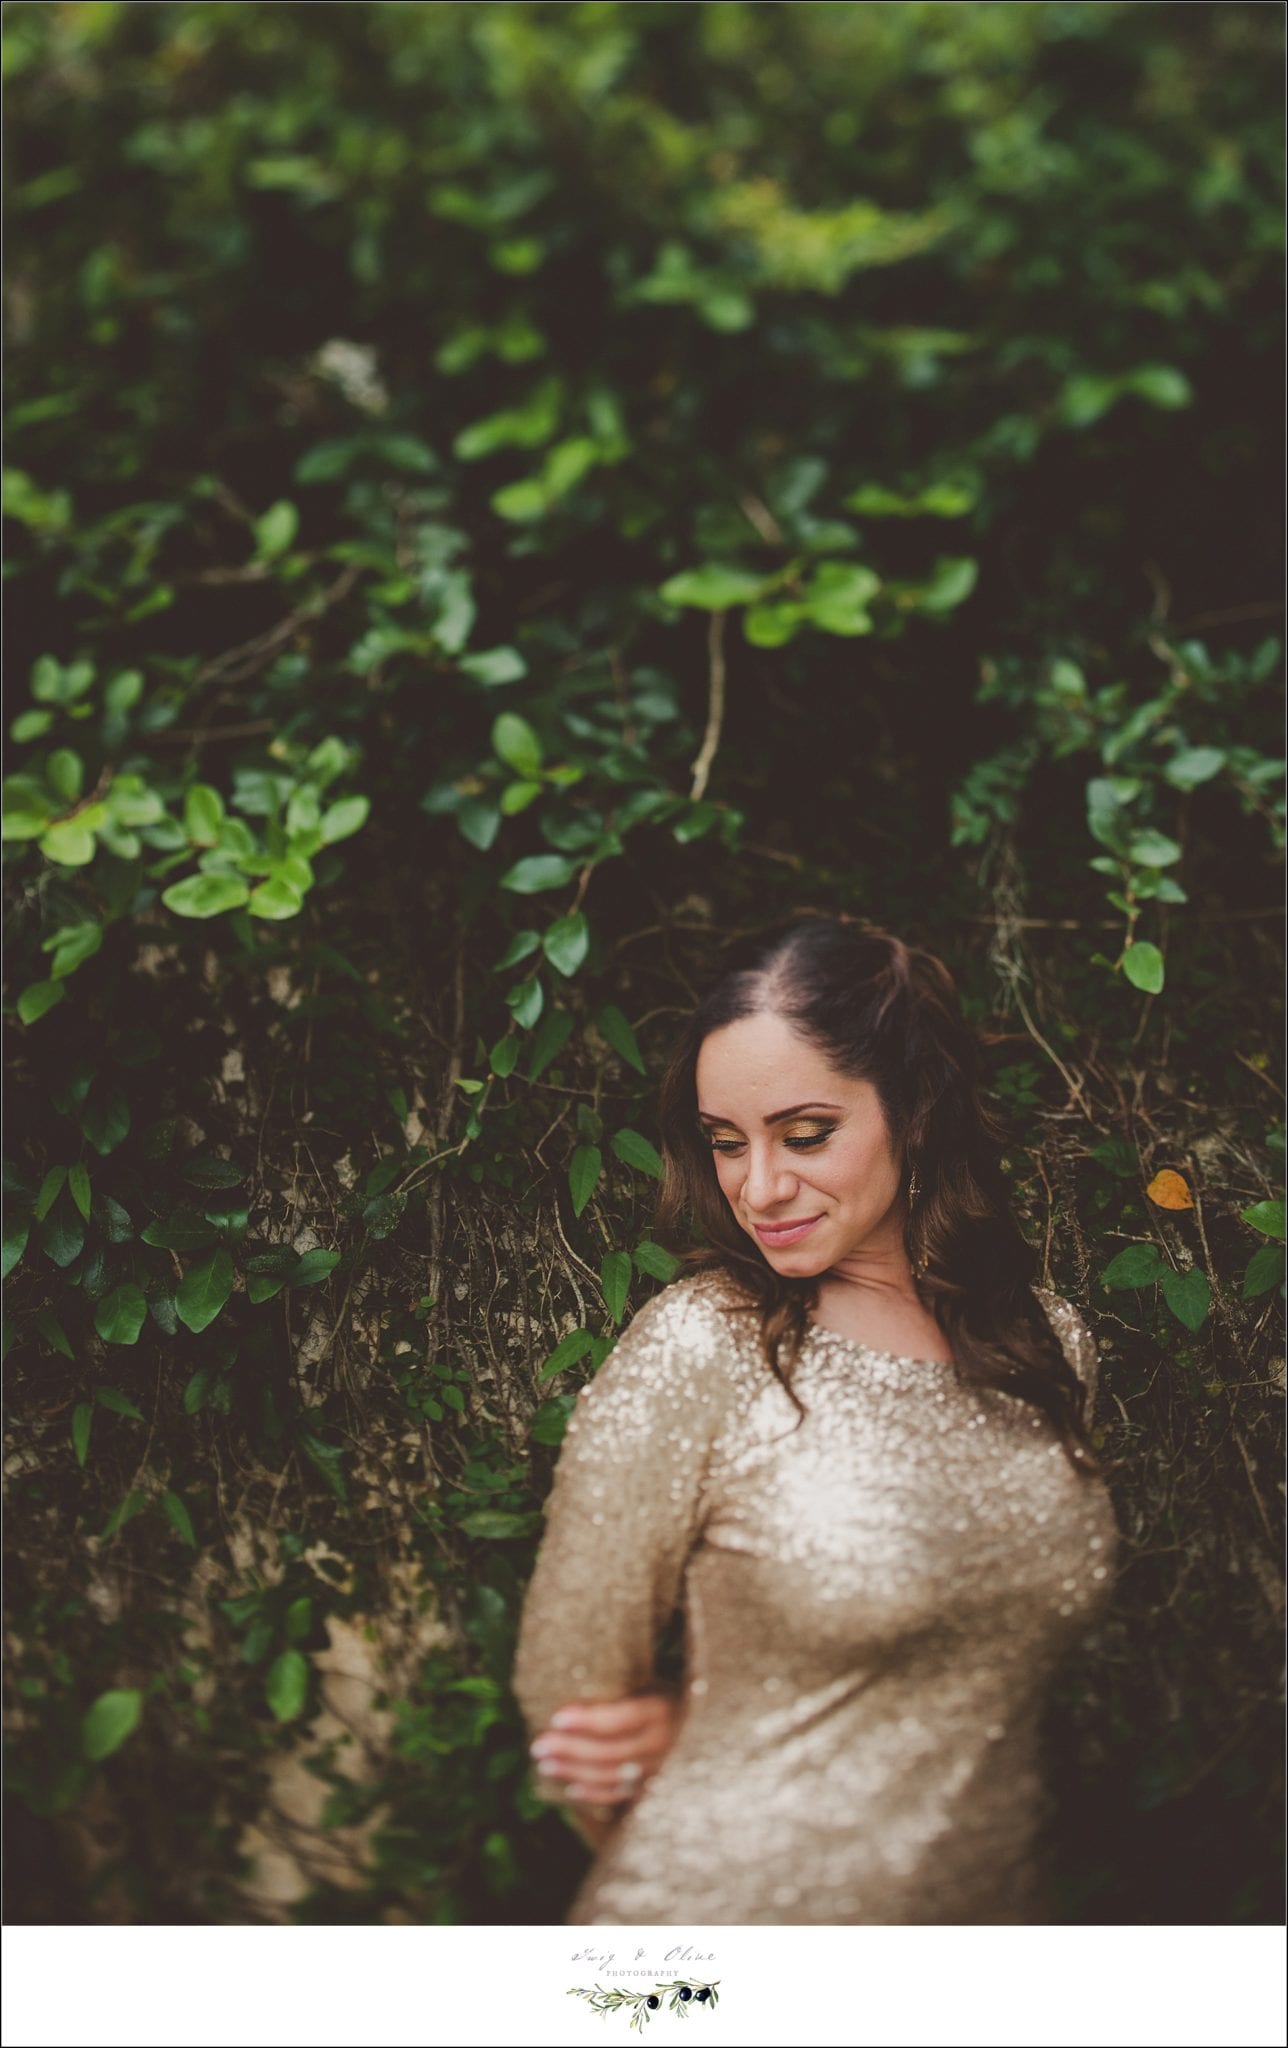 gorgeous, elegant, passionate, beautiful woman, anniversary session, Twig and Olive anniversary sessions